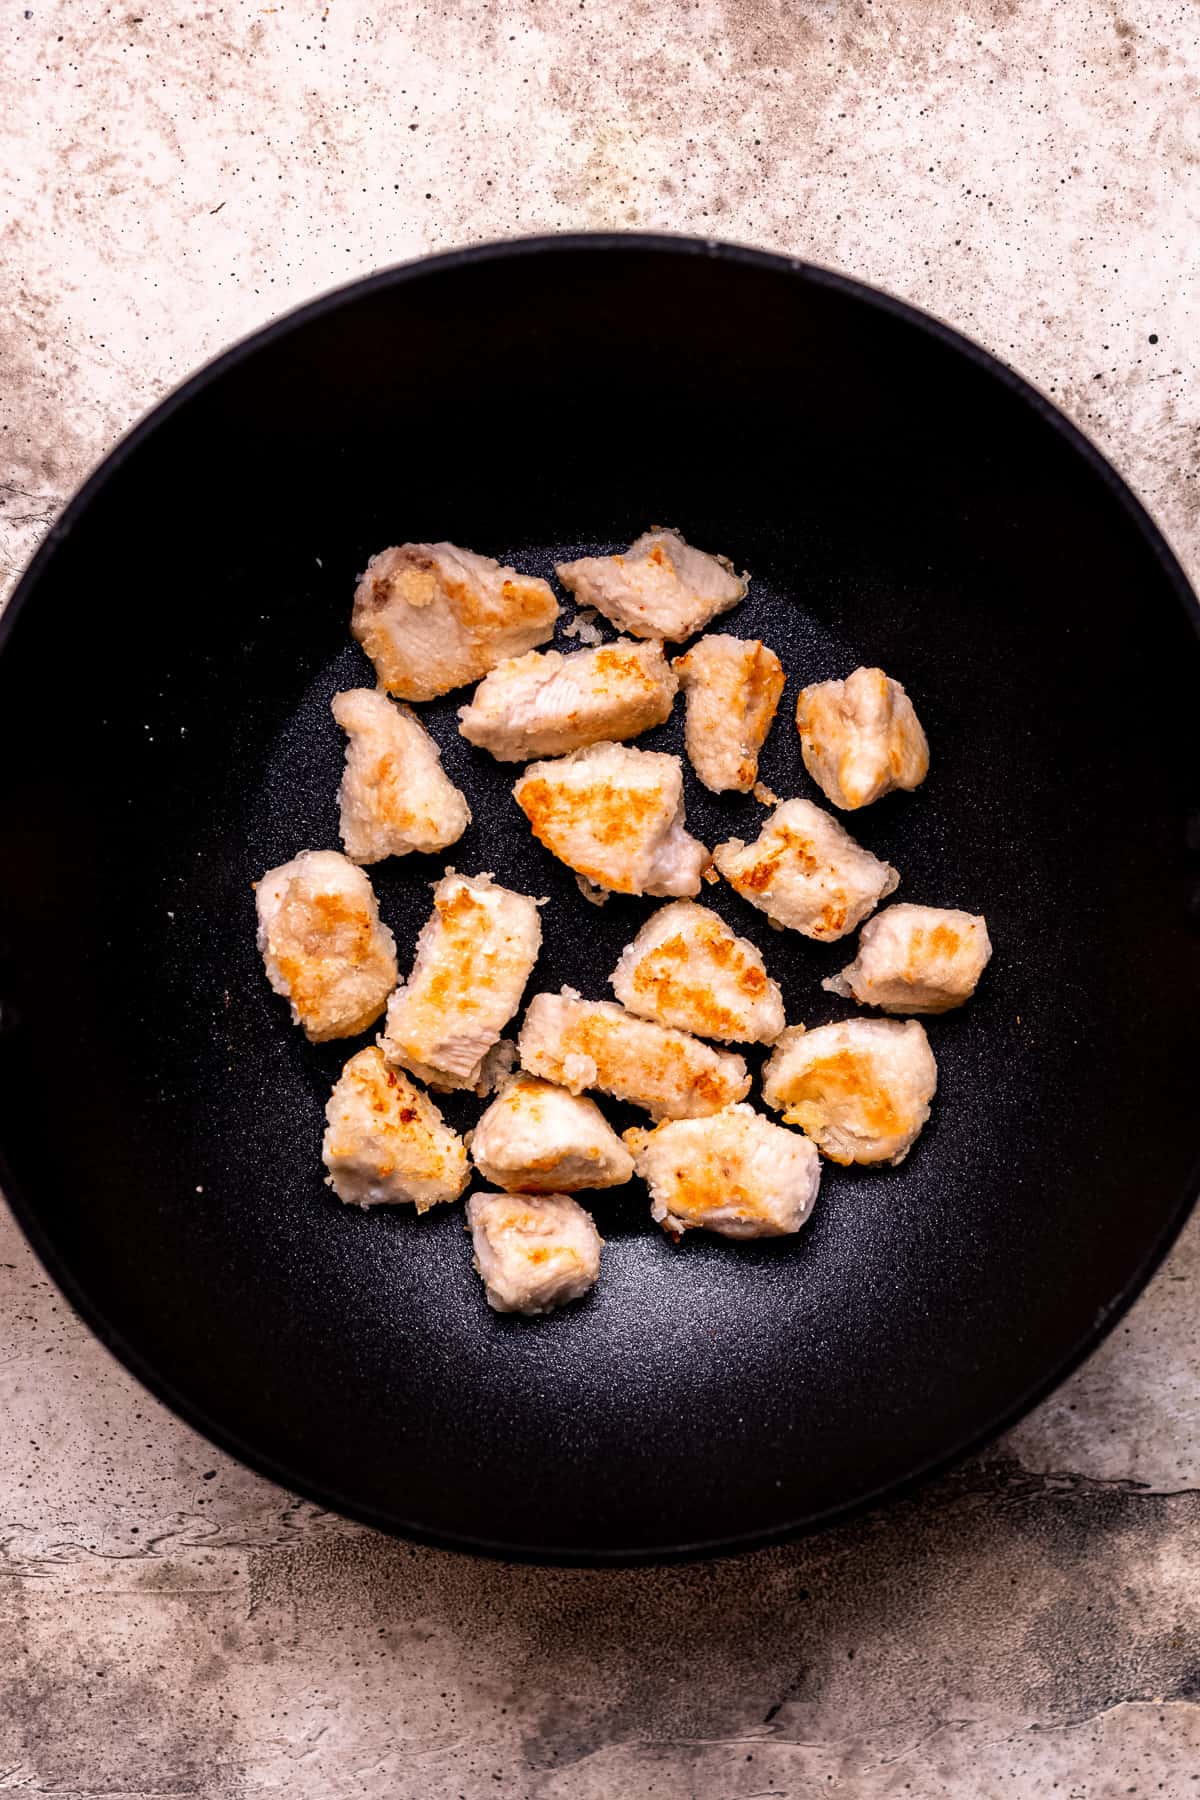 Browning the chicken in a nonstick frying pan.